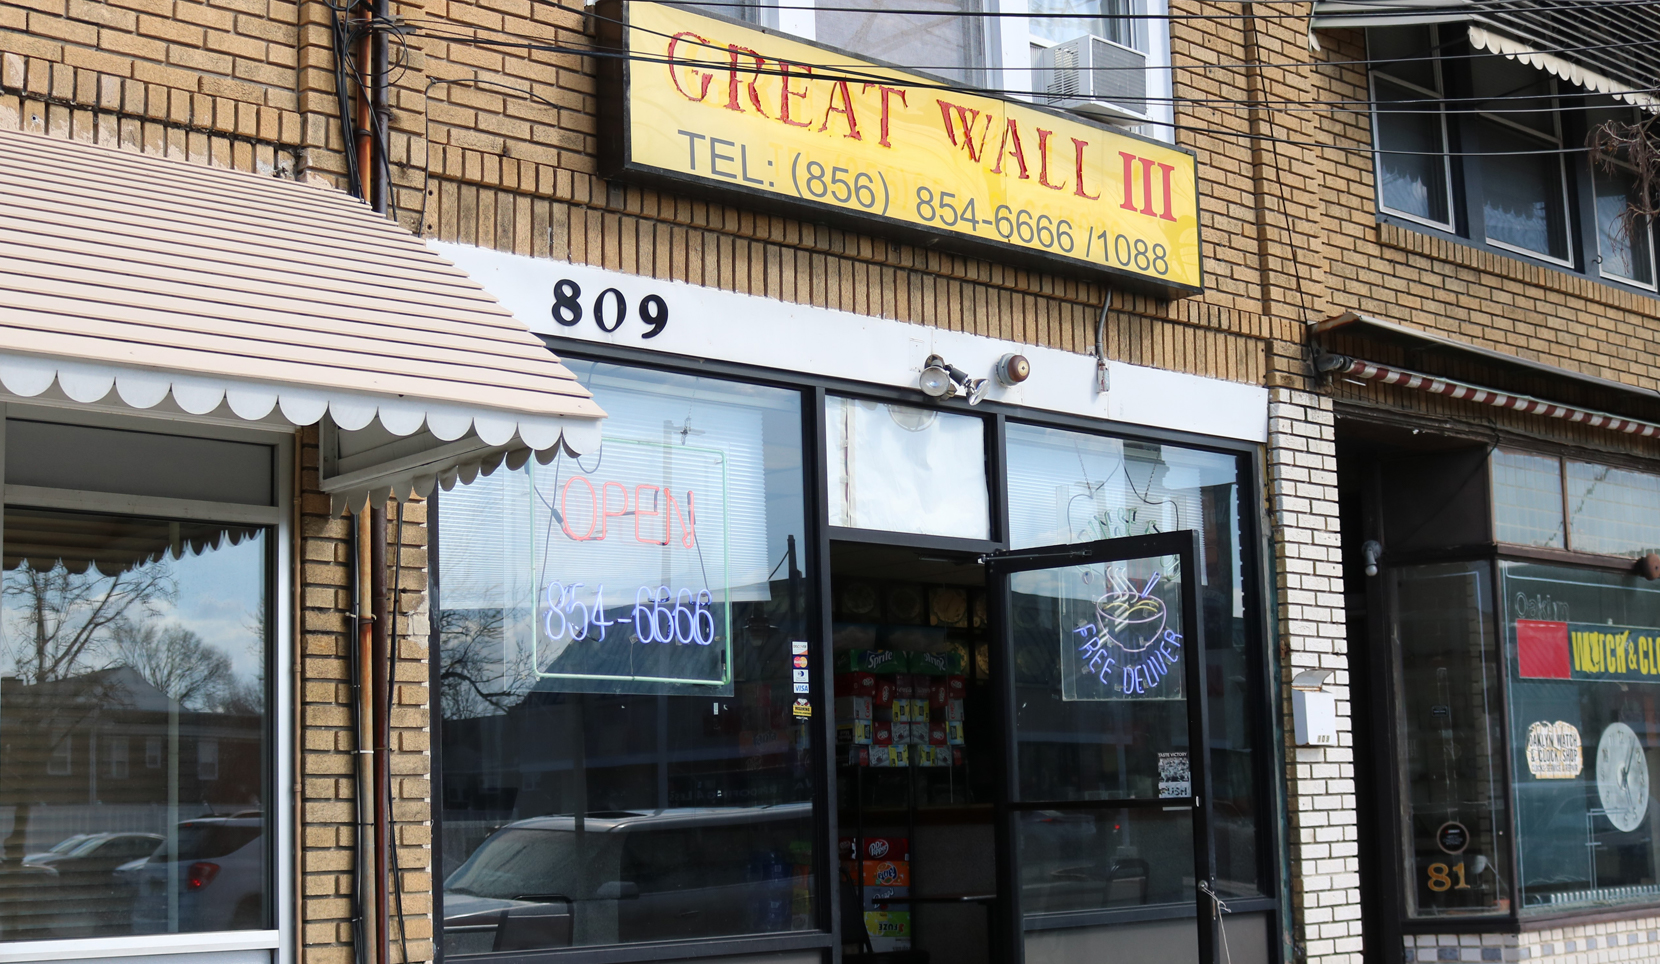 great wall chinese restaurant